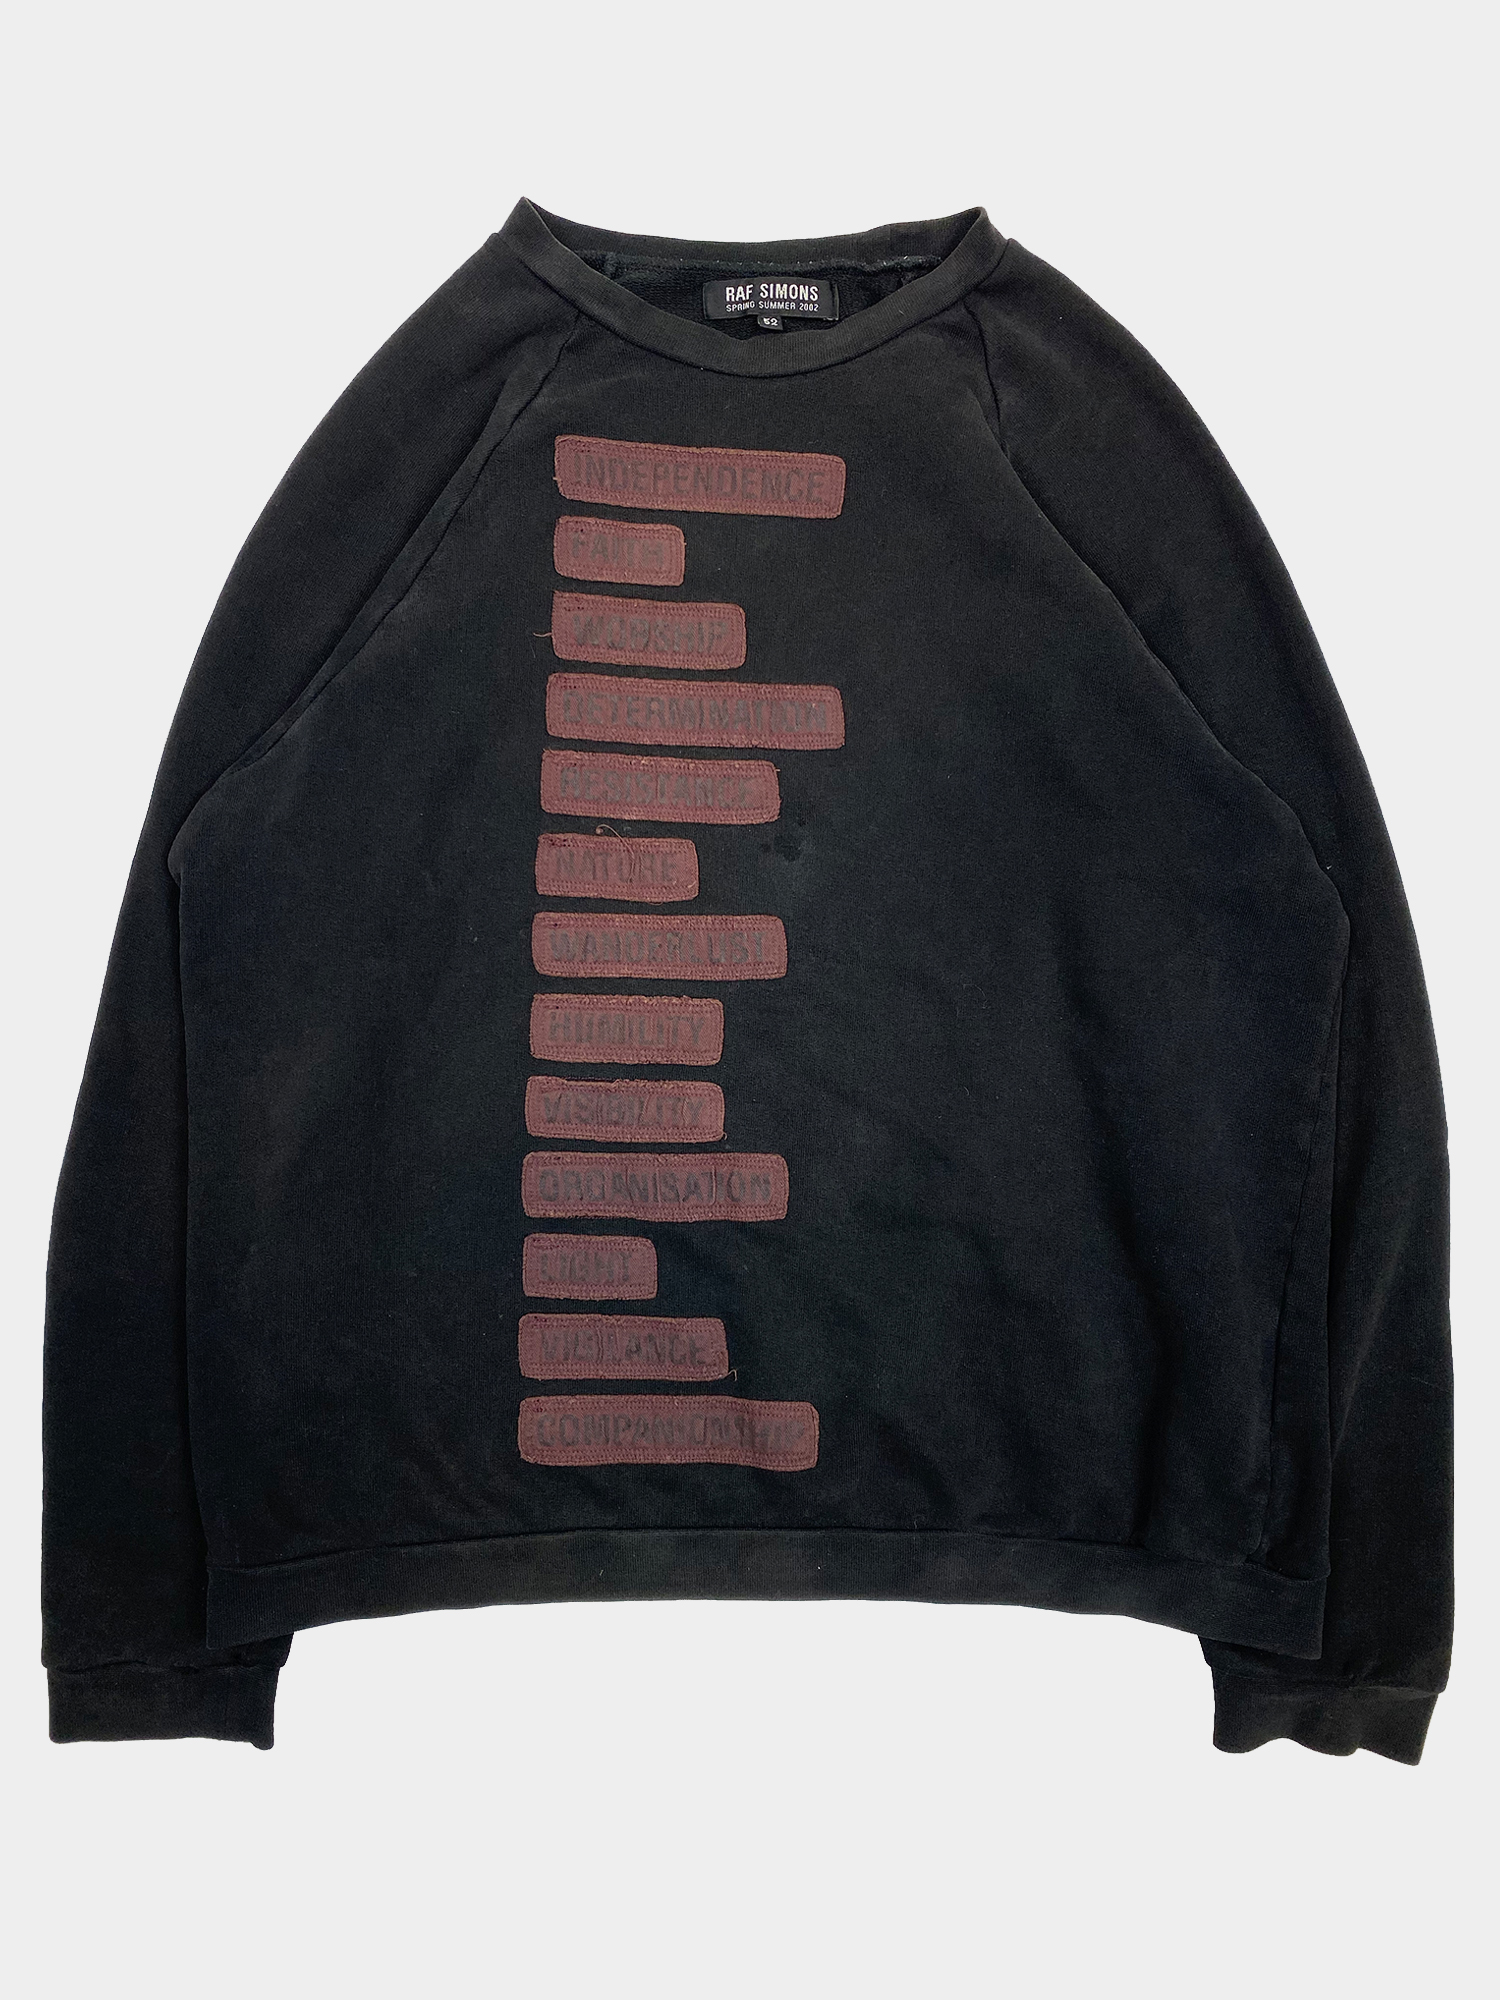 RAF SIMONS S/S02 Independence Patched Sweatshirt — ARCHIVED